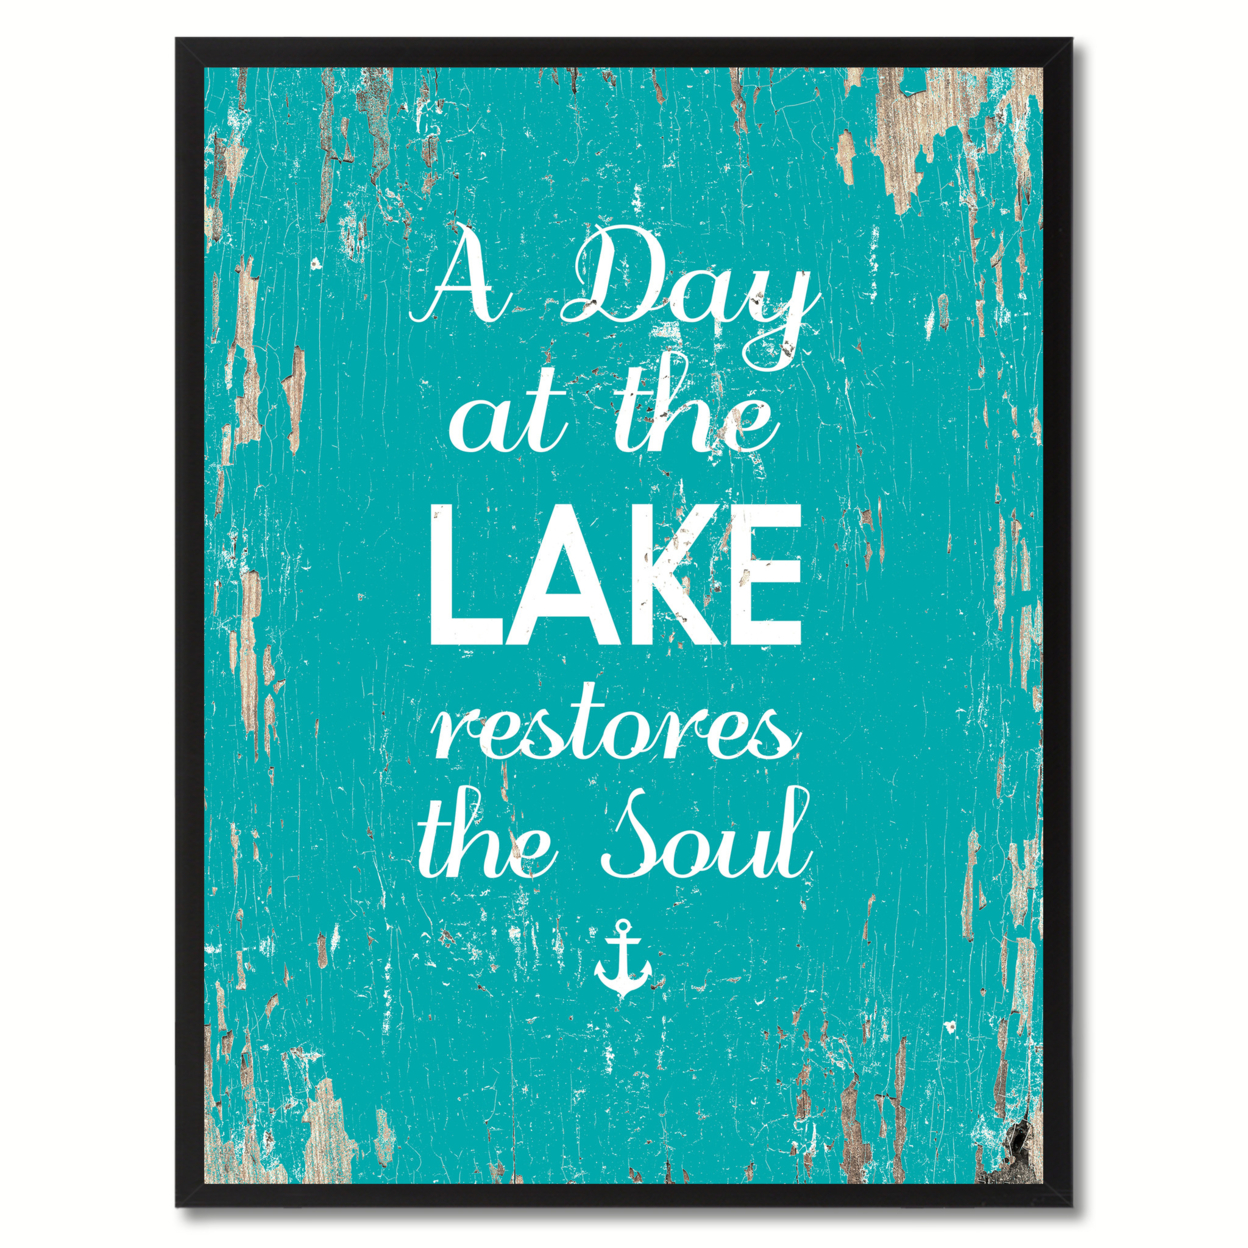 A Day At The Lake Restores The Soul Saying Canvas Print with Picture Frame Home Decor Wall Art Gifts - 13"x17"